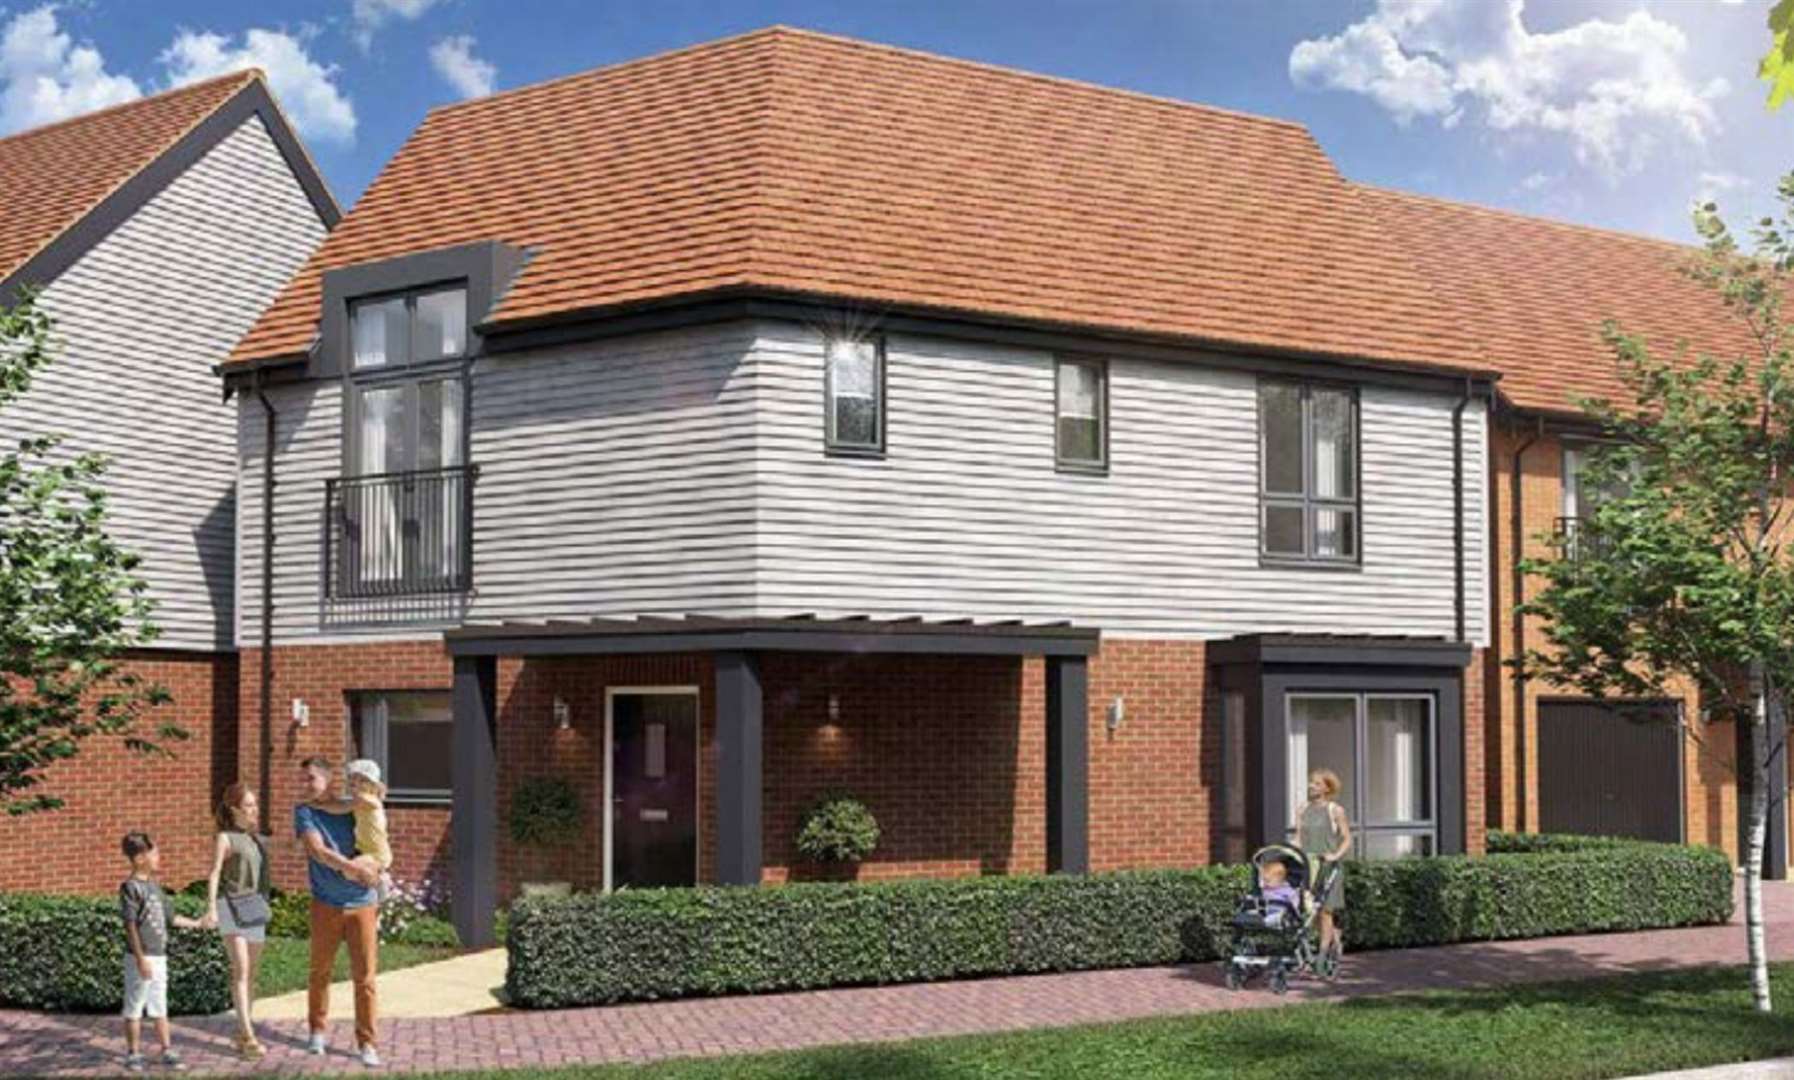 A total of 53 homes are planned for land in Ash, near Canterbury. Picture: Taylor Roberts Ltd